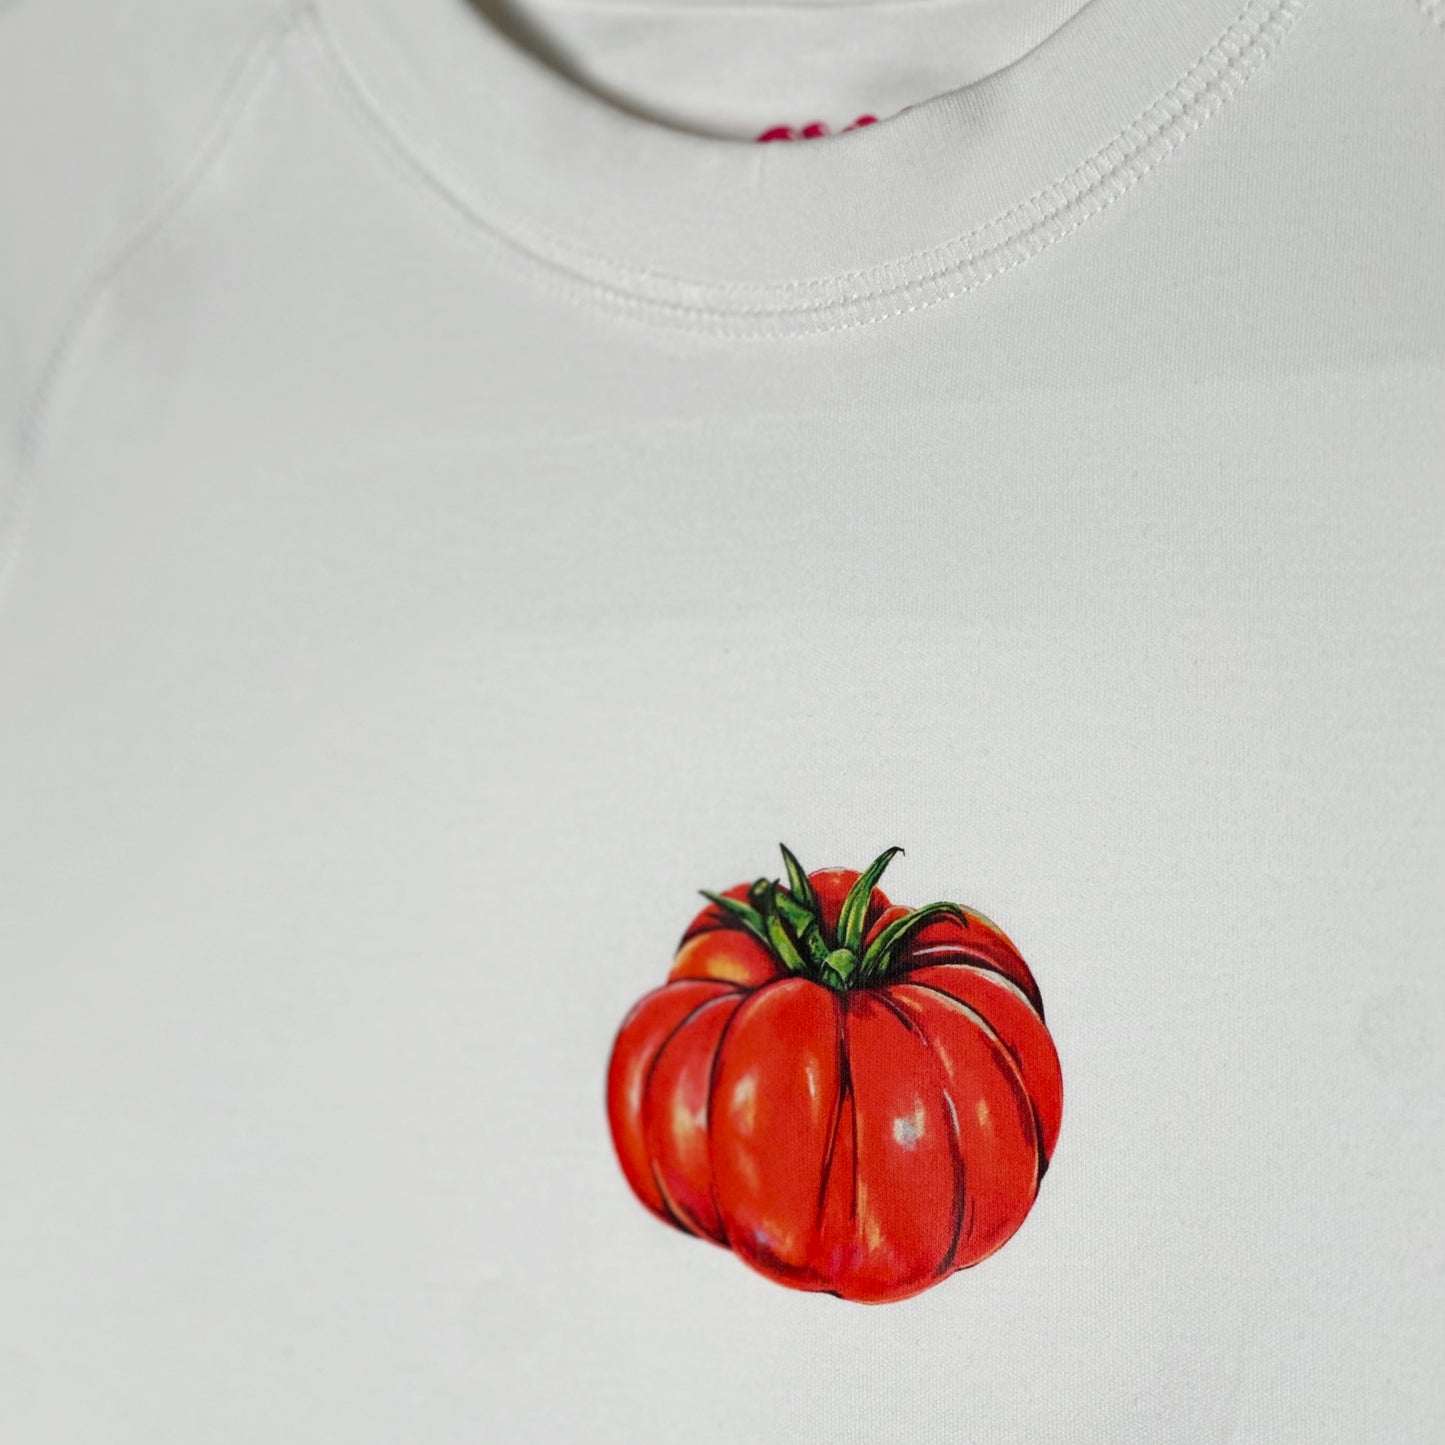 Cropped Tee - Heirloom Tomato